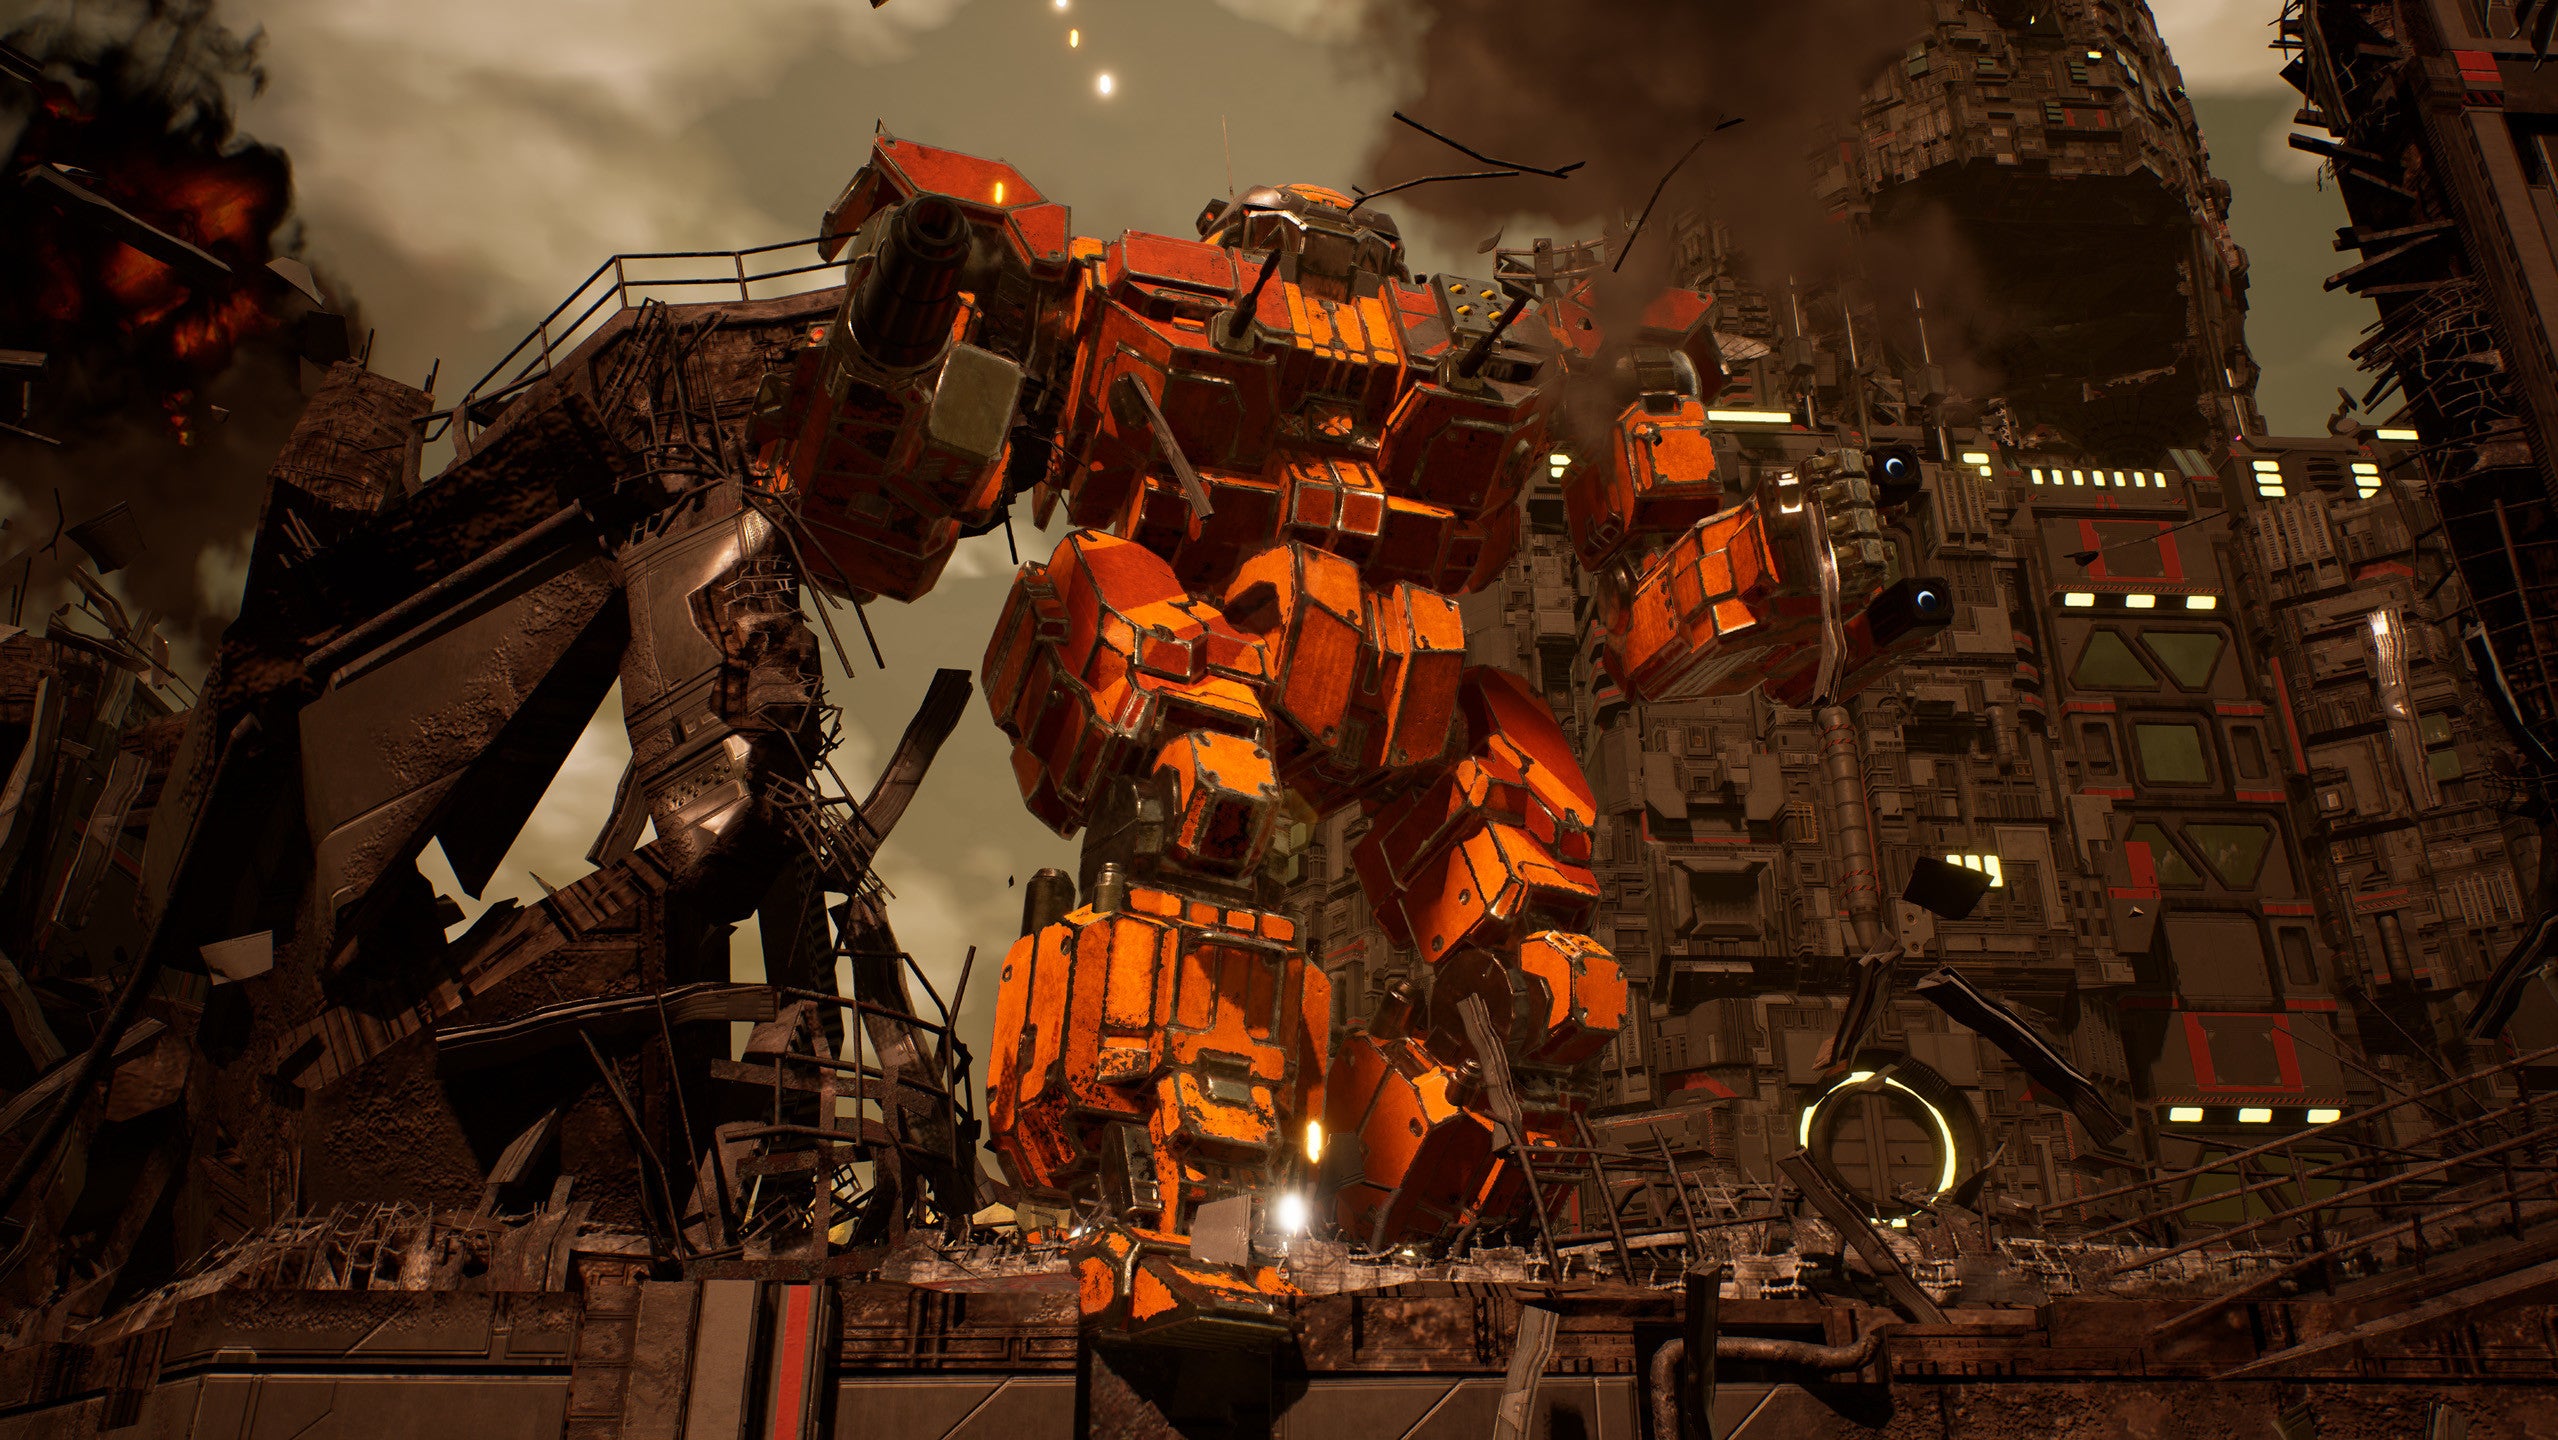 There's a new single-player MechWarrior game in the works